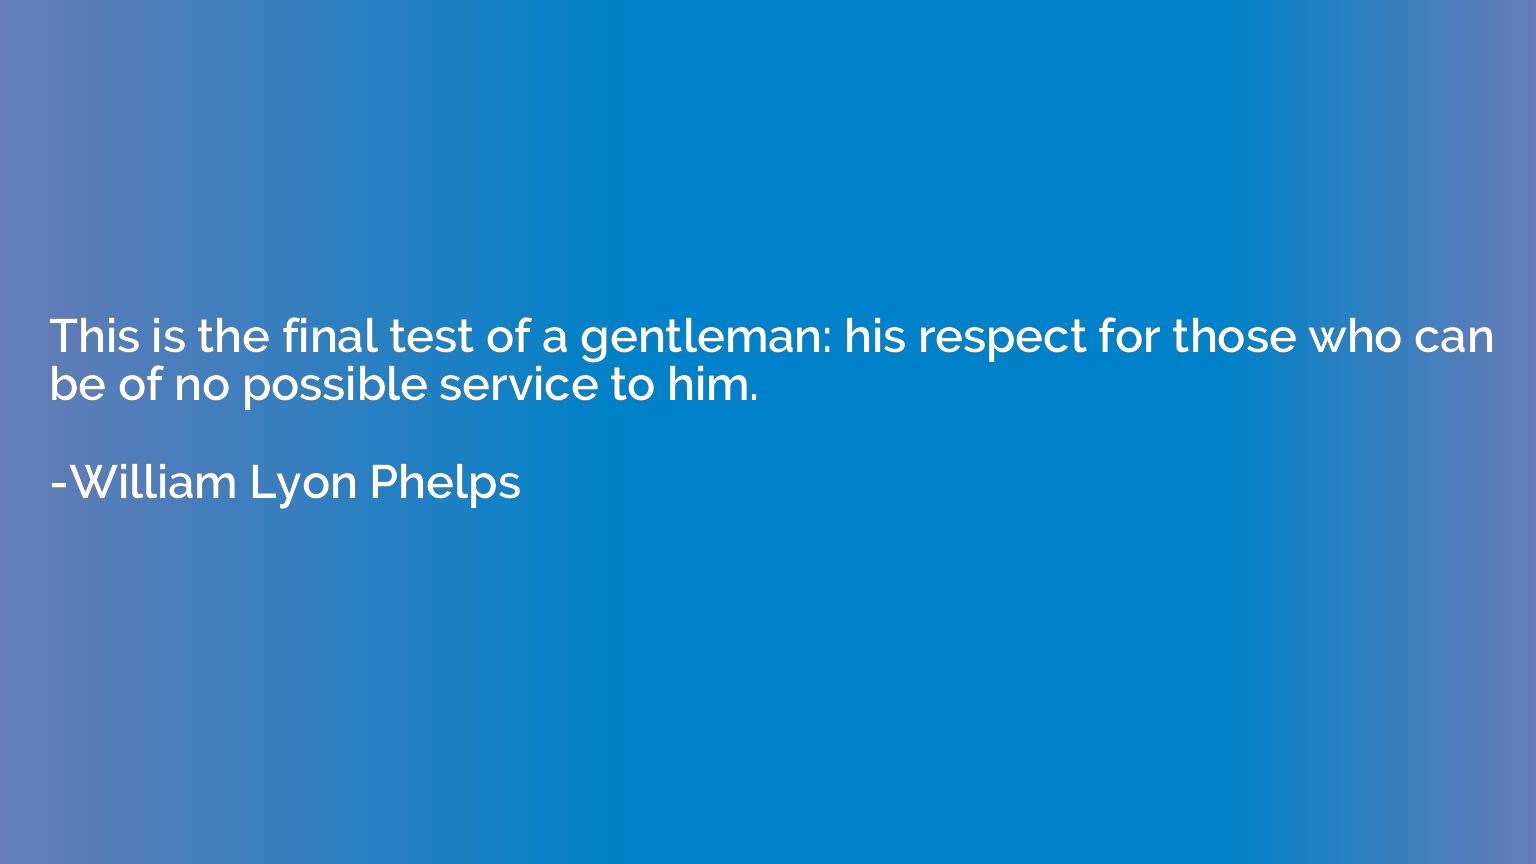 This is the final test of a gentleman: his respect for those